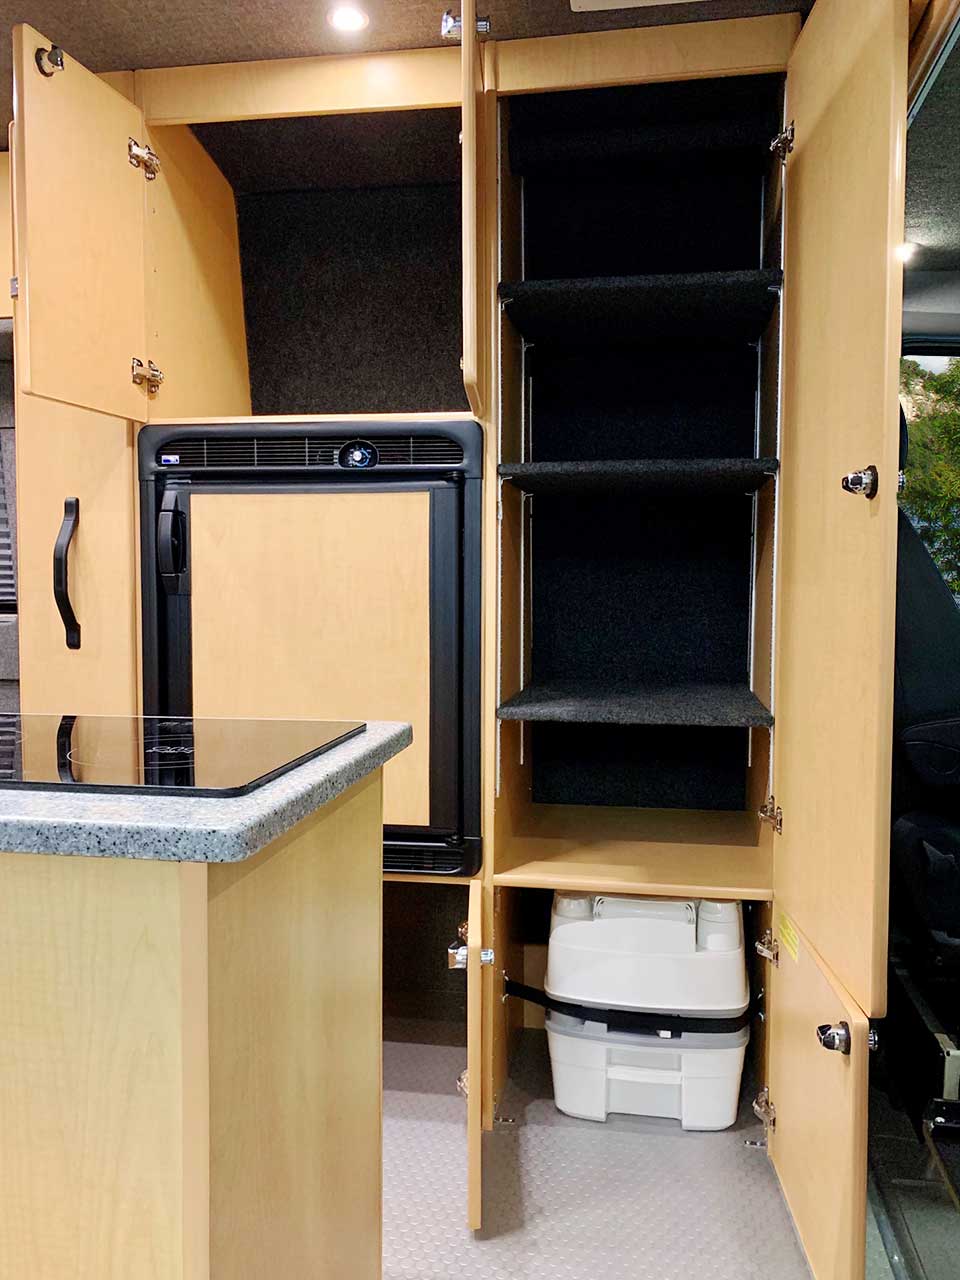 Plenty of storage upfront with tall cabinets.